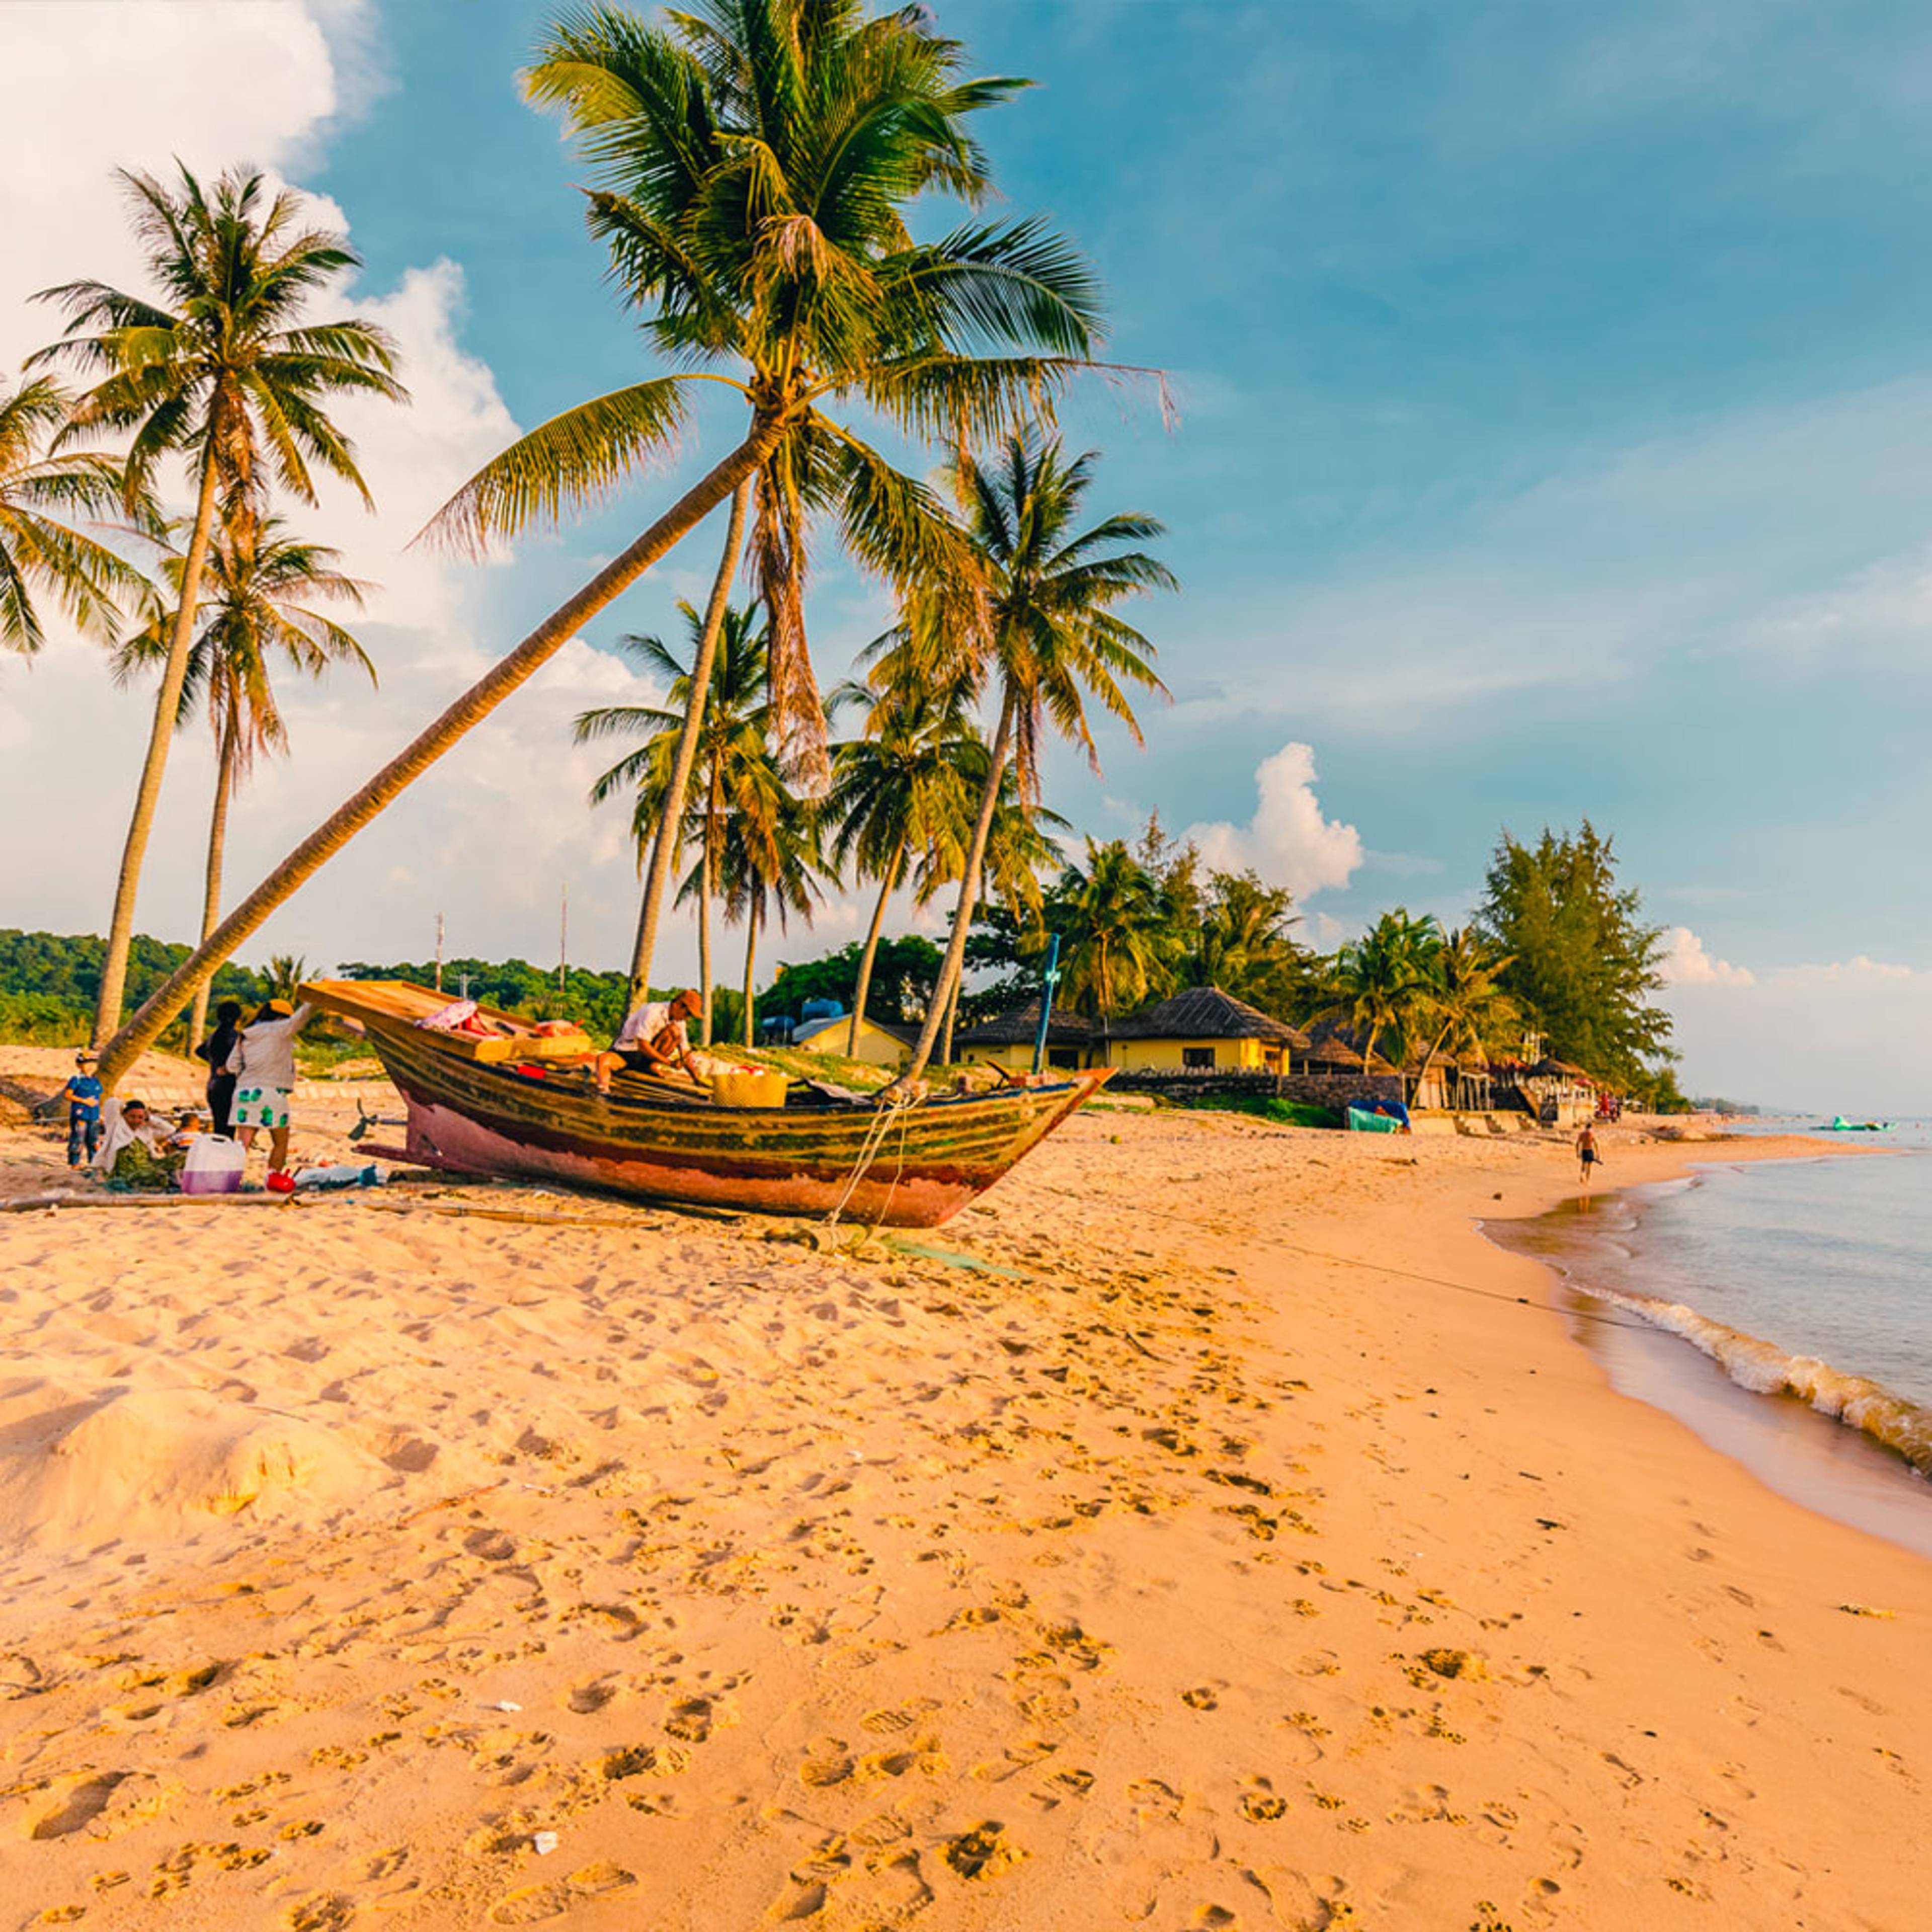 Design your perfect tour of Vietnam's beaches with a local expert